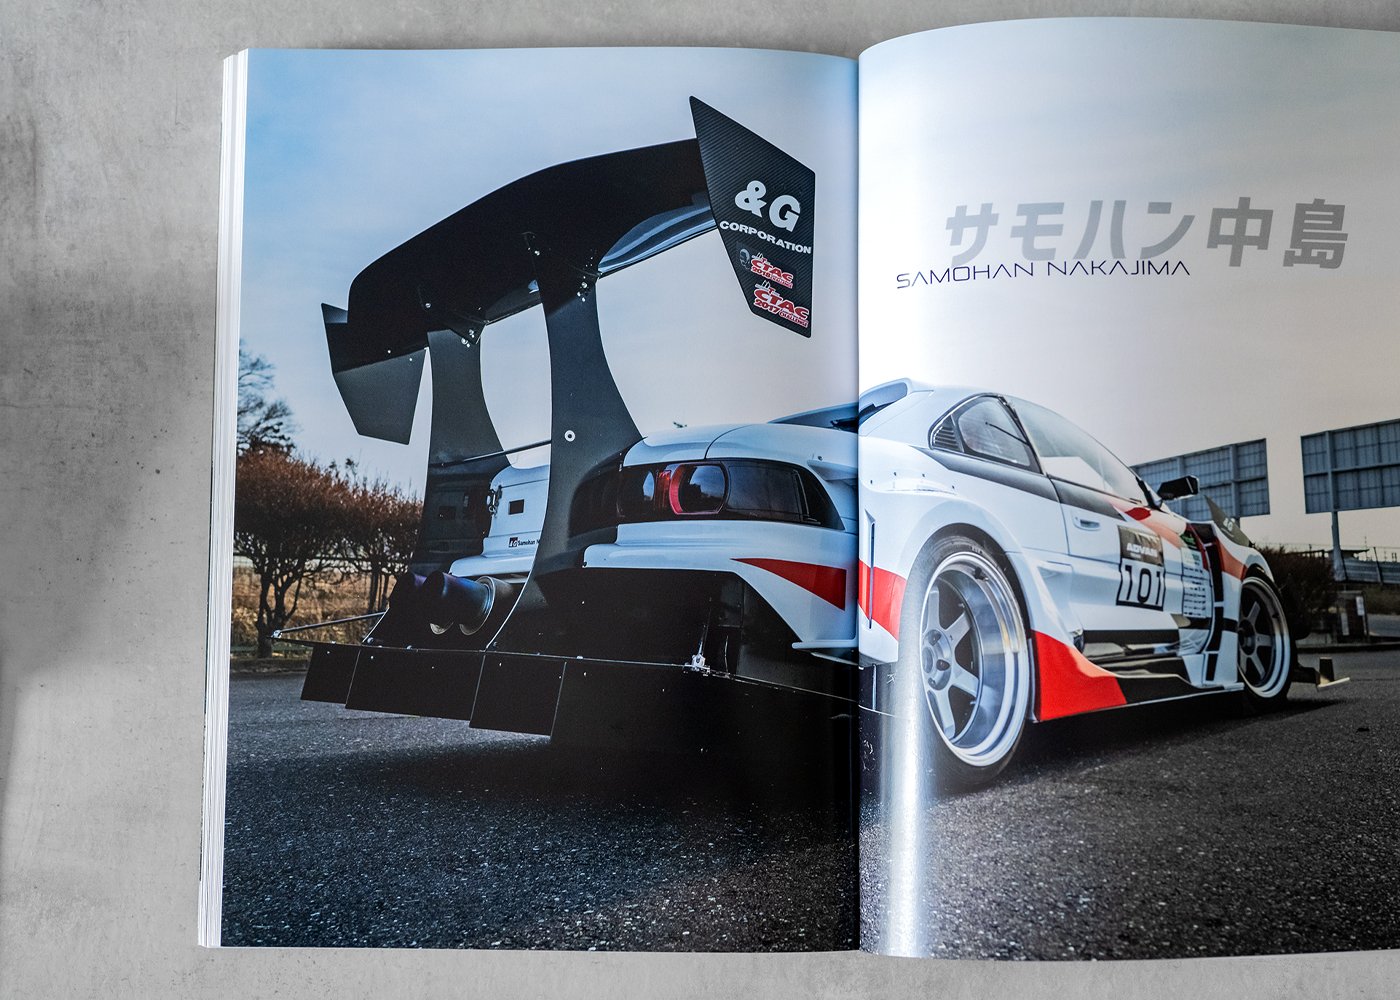 80R Volume 2 - The Story of Japan's Fastest Time Attack Drivers